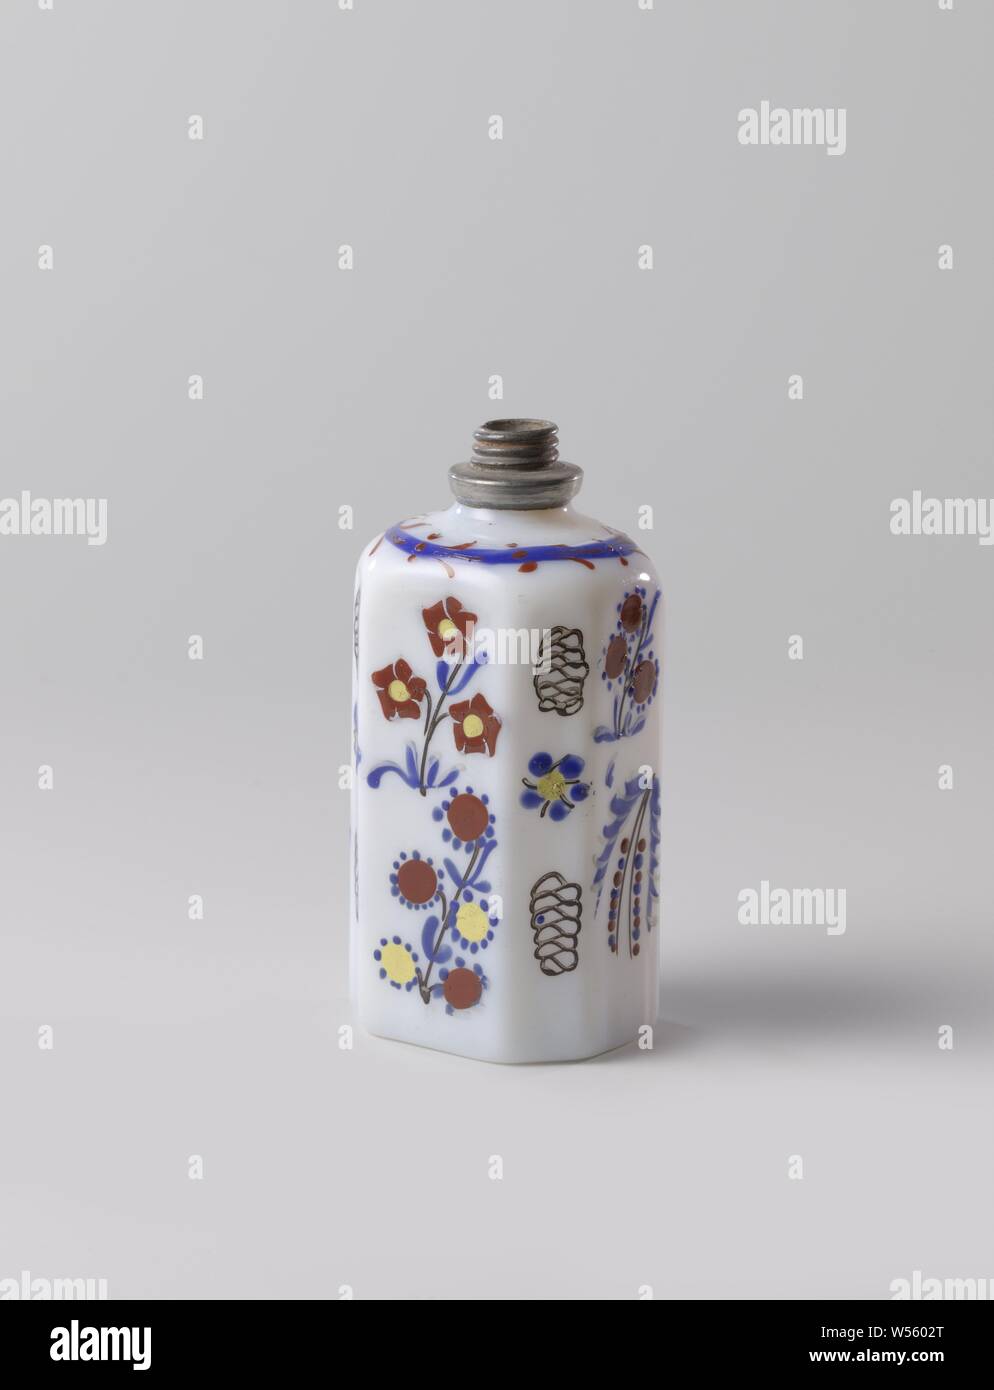 https://c8.alamy.com/comp/W5602T/octagonal-bottle-of-milk-glass-with-flower-and-braid-motifs-flat-bottom-octagonal-body-blown-body-with-black-red-yellow-and-blue-stylized-flower-sprays-on-the-front-and-back-and-floral-and-braid-ornaments-on-the-narrow-sides-a-branch-on-the-shoulder-the-mouth-encased-in-a-pewter-frame-with-screw-thread-anonymous-midden-europa-c-1700-c-1800-glass-tin-metal-glassblowing-h-12-cm-d-6-cm-w-5-cm-W5602T.jpg